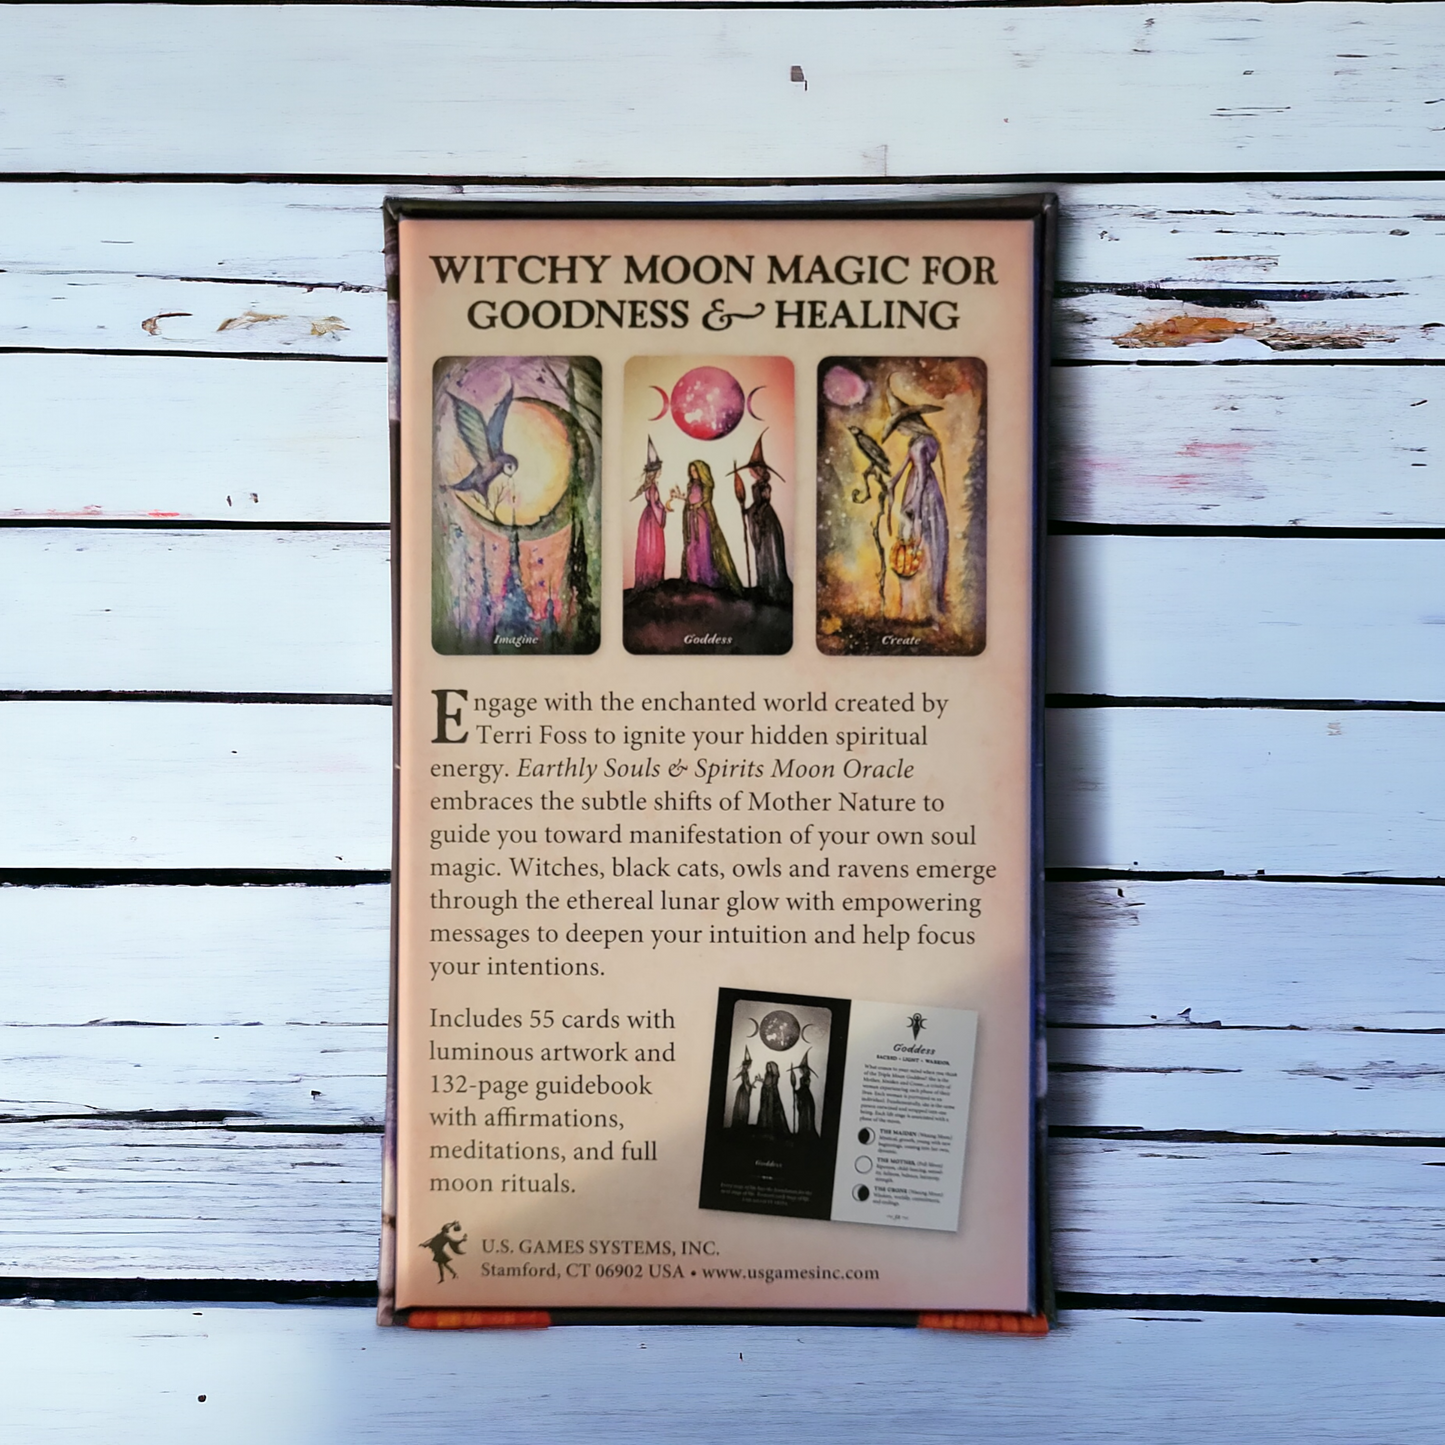 (NEW) Earthly Souls & Spirits Moon Oracle by Terri Foss